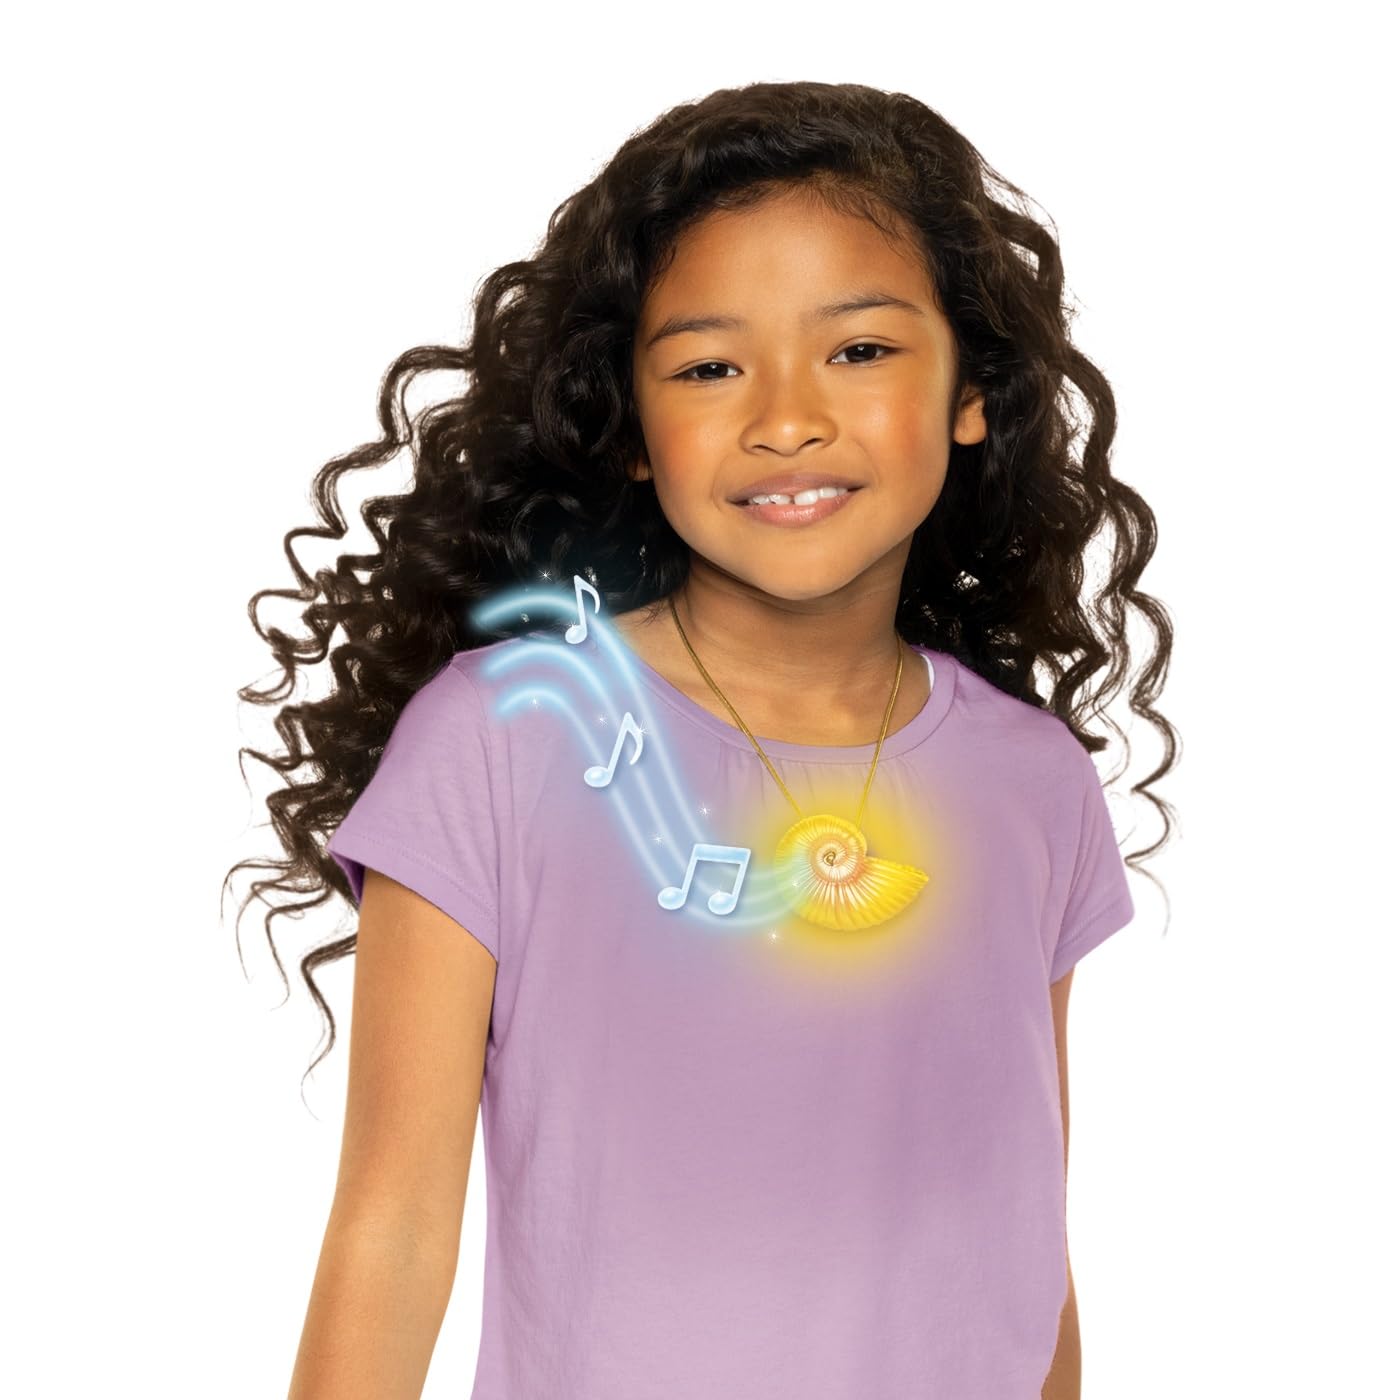 Disney The Little Mermaid Ariel Light-Up Seashell Necklace w/ Ariel's Singing Voice $4.50 + Free Shipping w/ Prime or on $35+